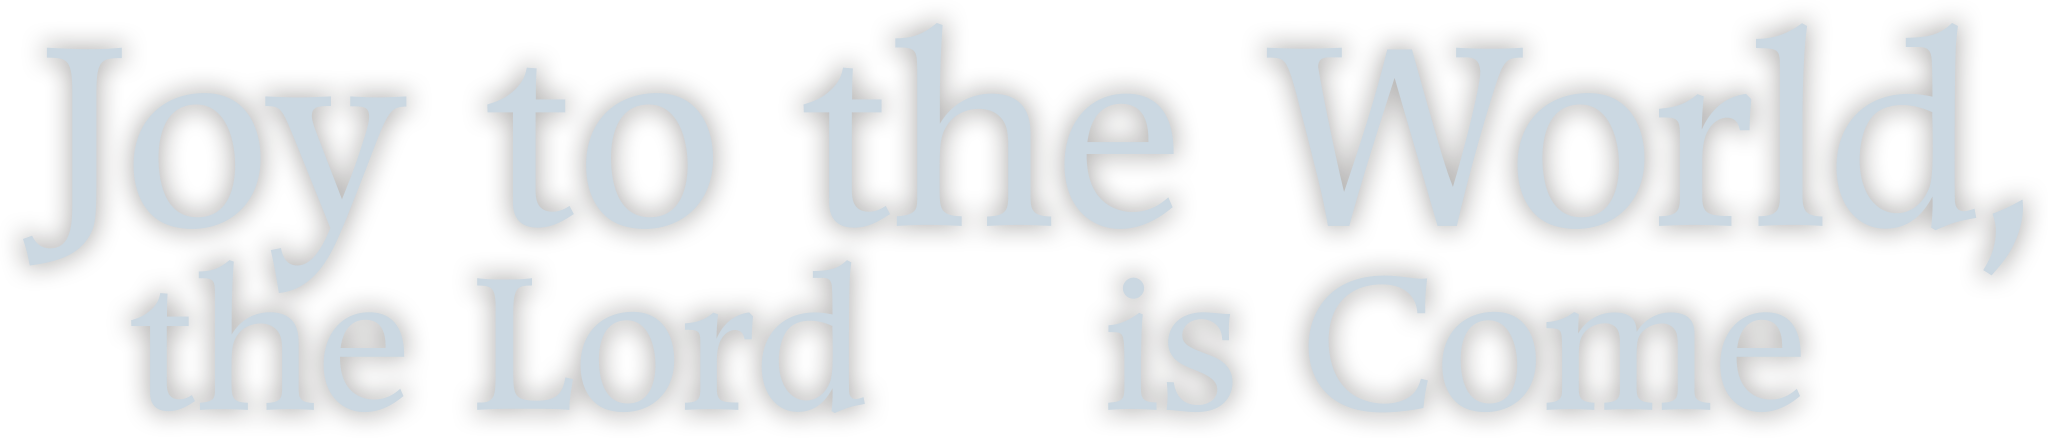 Joy to the World the Lord is Come typography